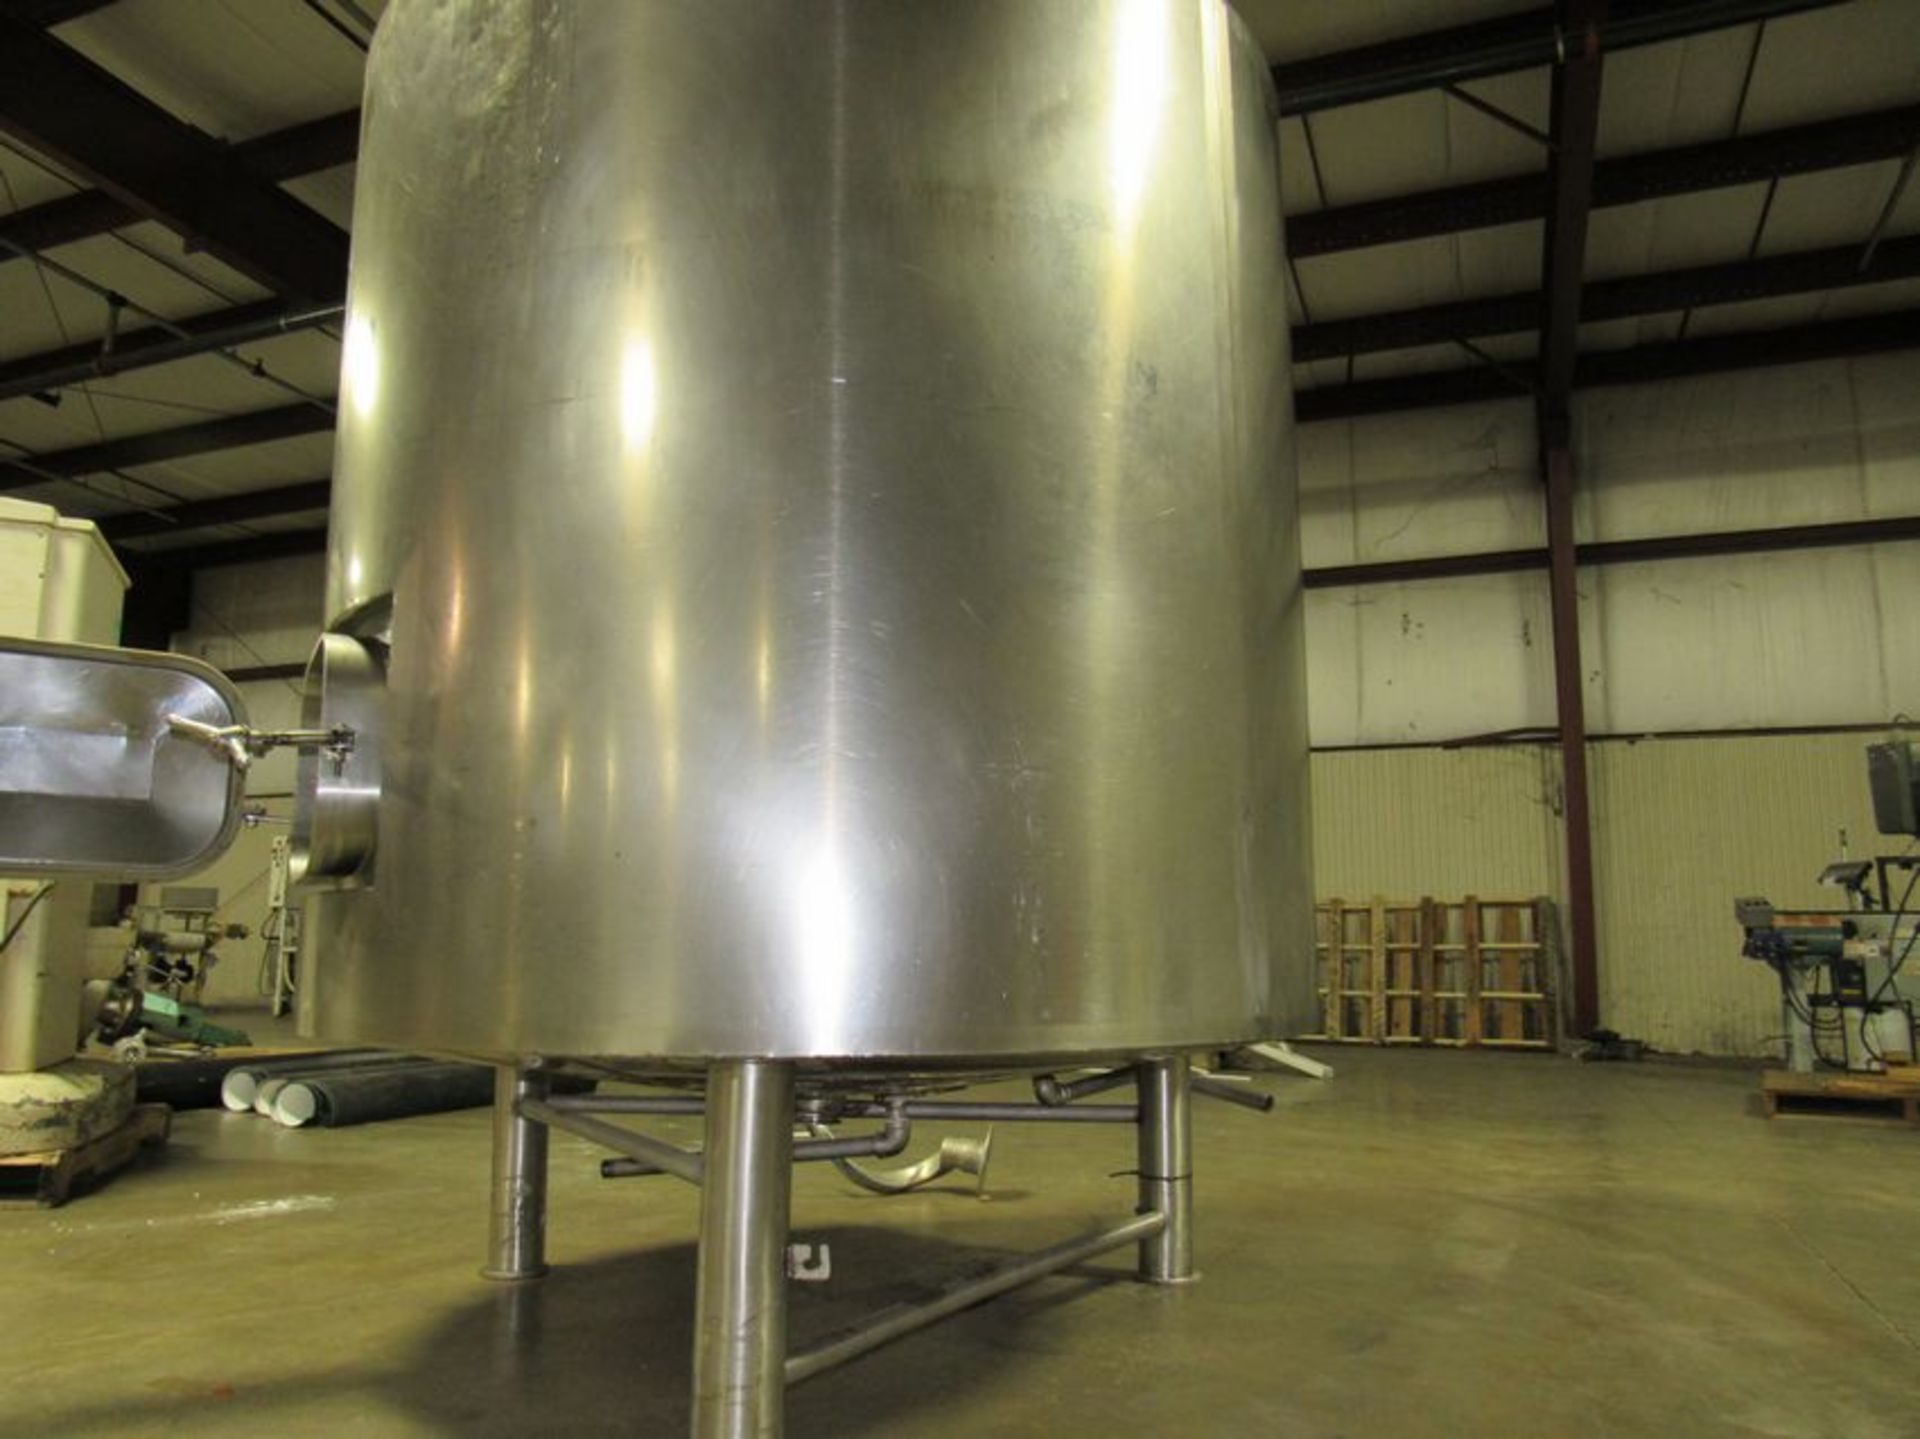 1500 liter food grade stainless steel jacketed tank in great condition. Inside approx. 4ft ft. dia - Image 10 of 11